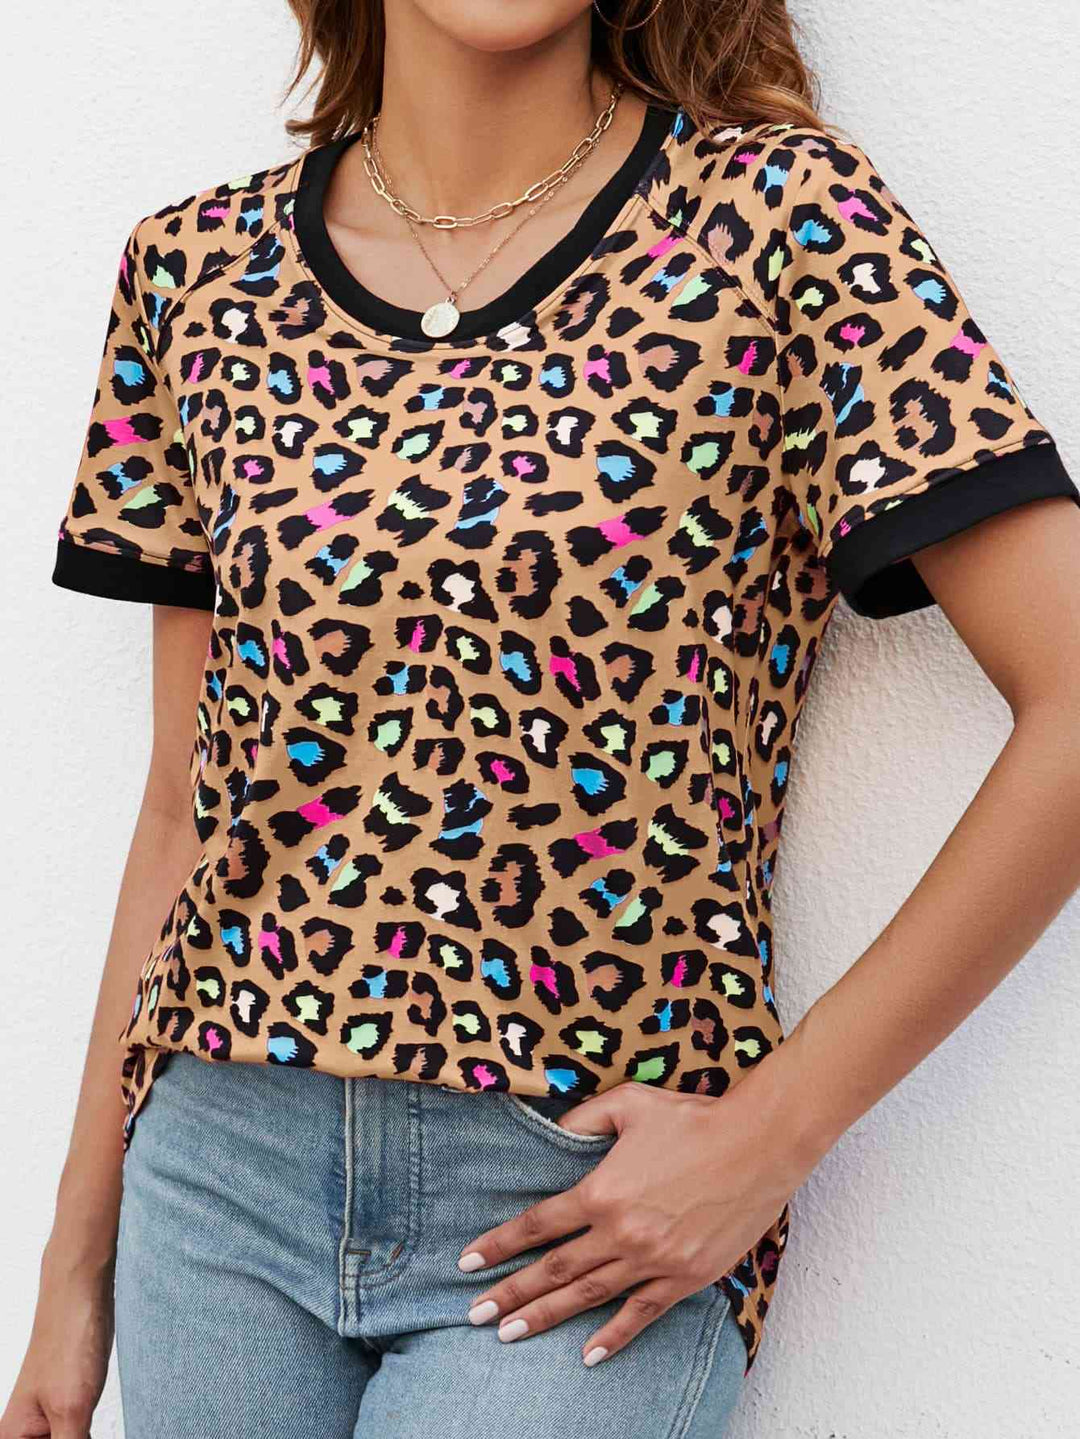 4 Colors - Leopard Round Neck Short Sleeve Tee Shirt